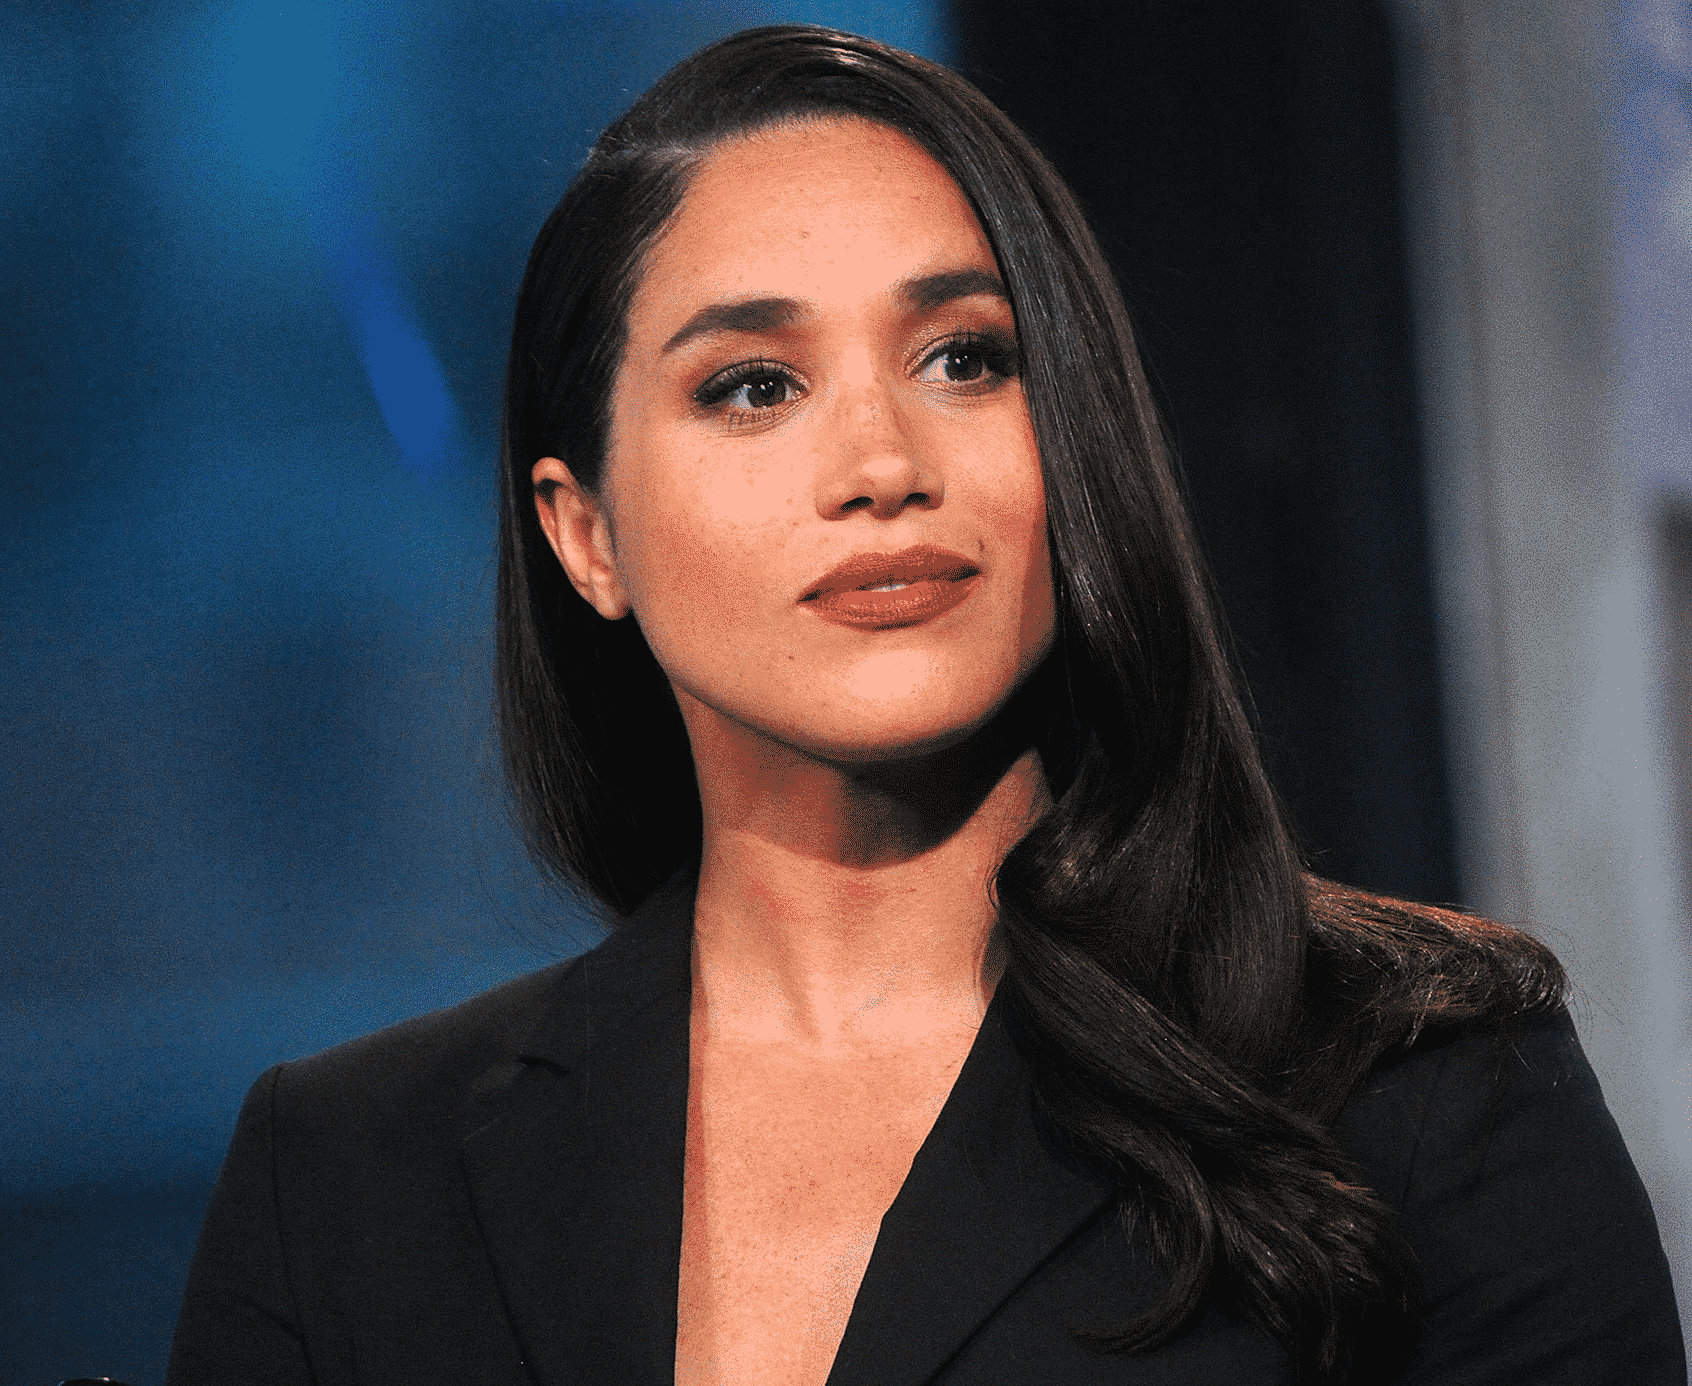 The fascinating history of Meghan Markle's family